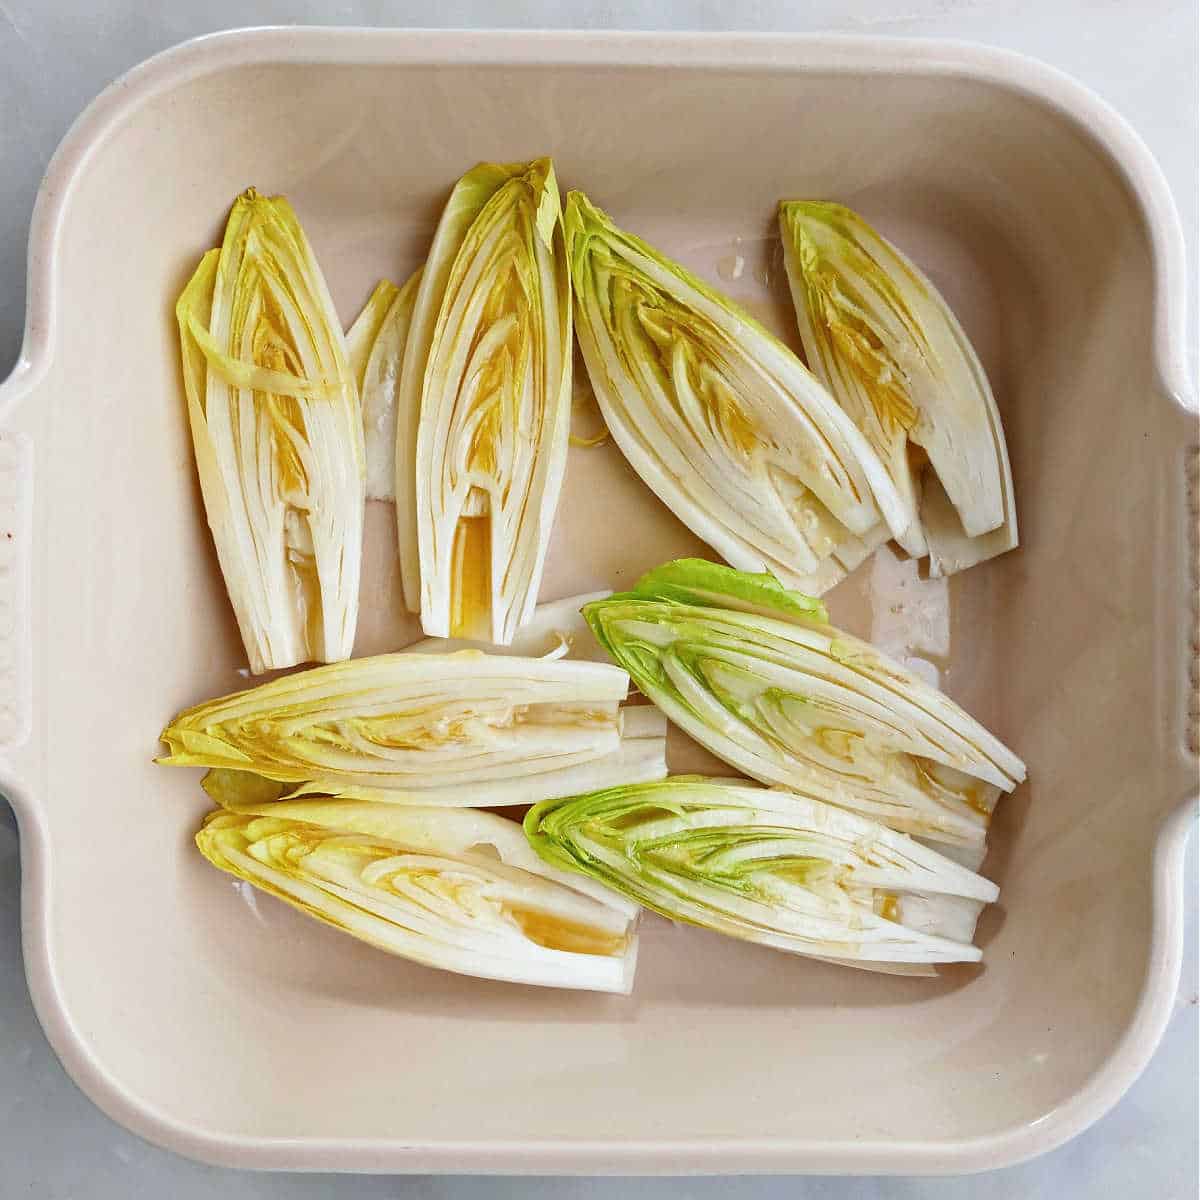 8 halves of Belgian endive topped with honey butter in a baking dish before being roasted